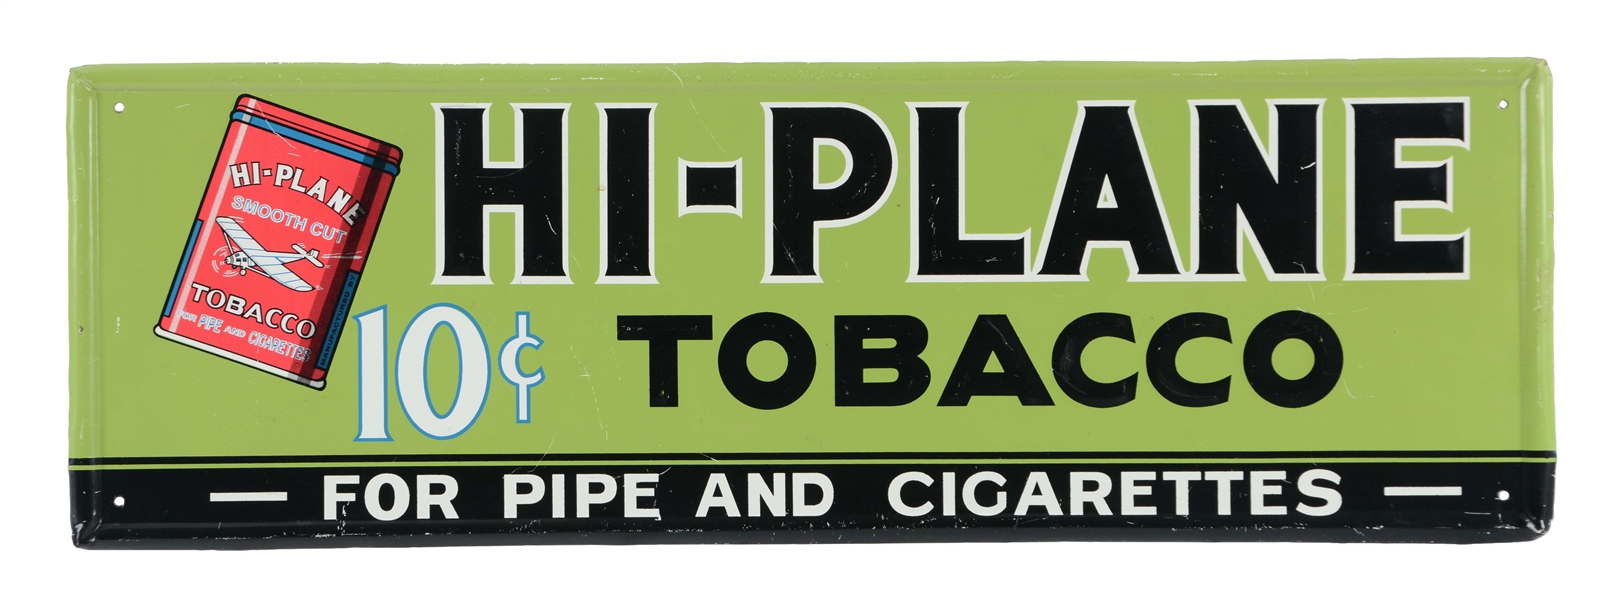 HI PLANE TOBACCO EMBOSSED TIN SIGN WITH AIRPLANE GRAPHIC.